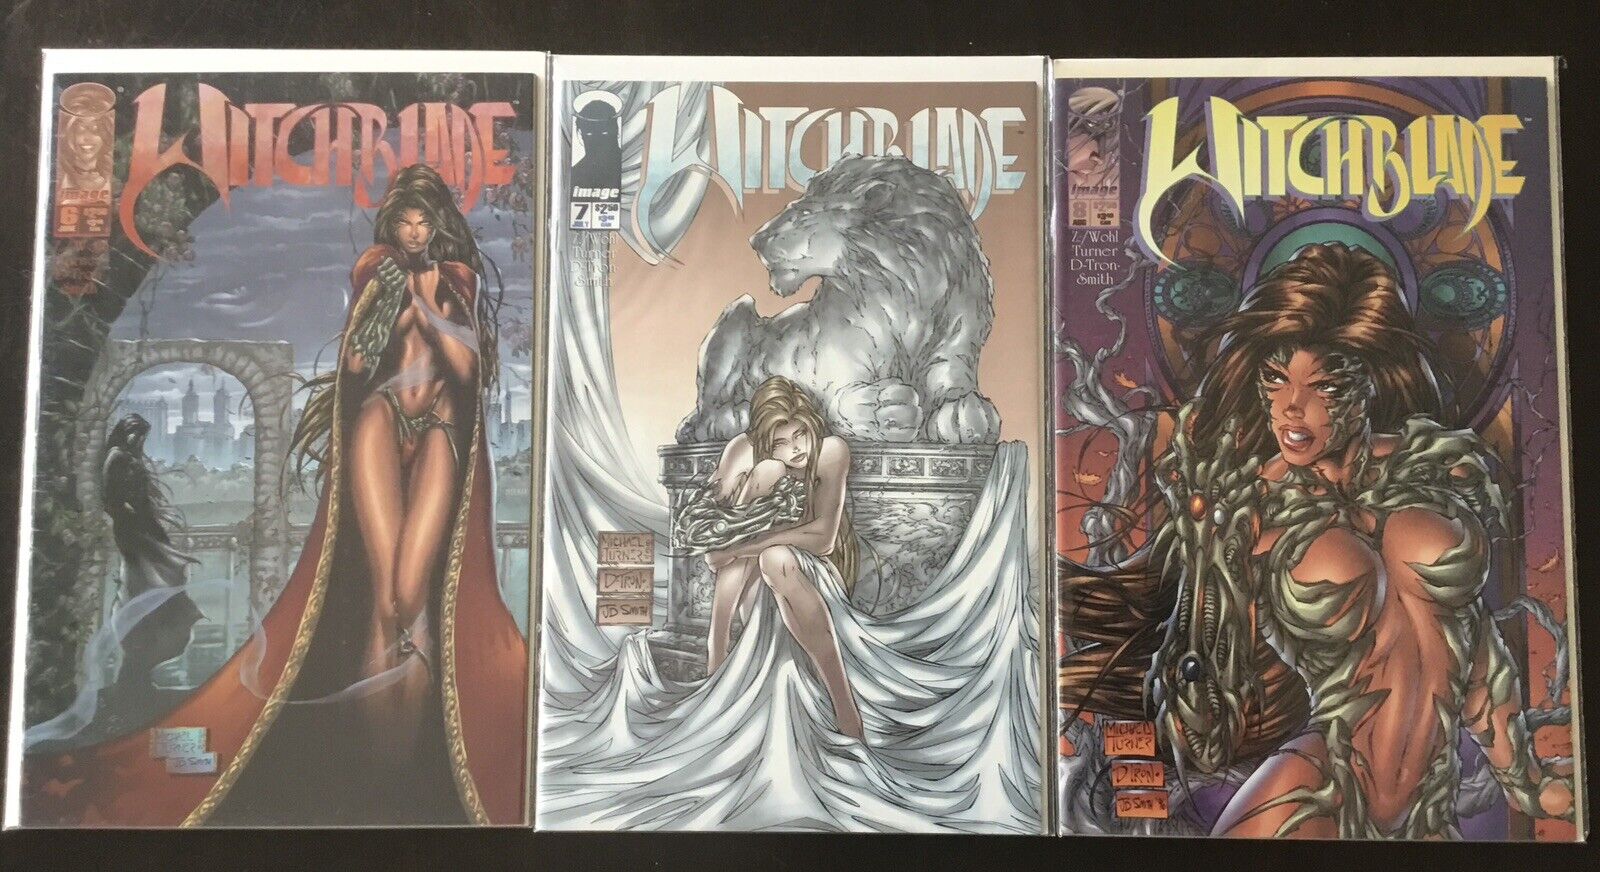 Witchblade #6 7 8 Michael Turner Covers Image Comics 1996 Lot of 3 High Grade